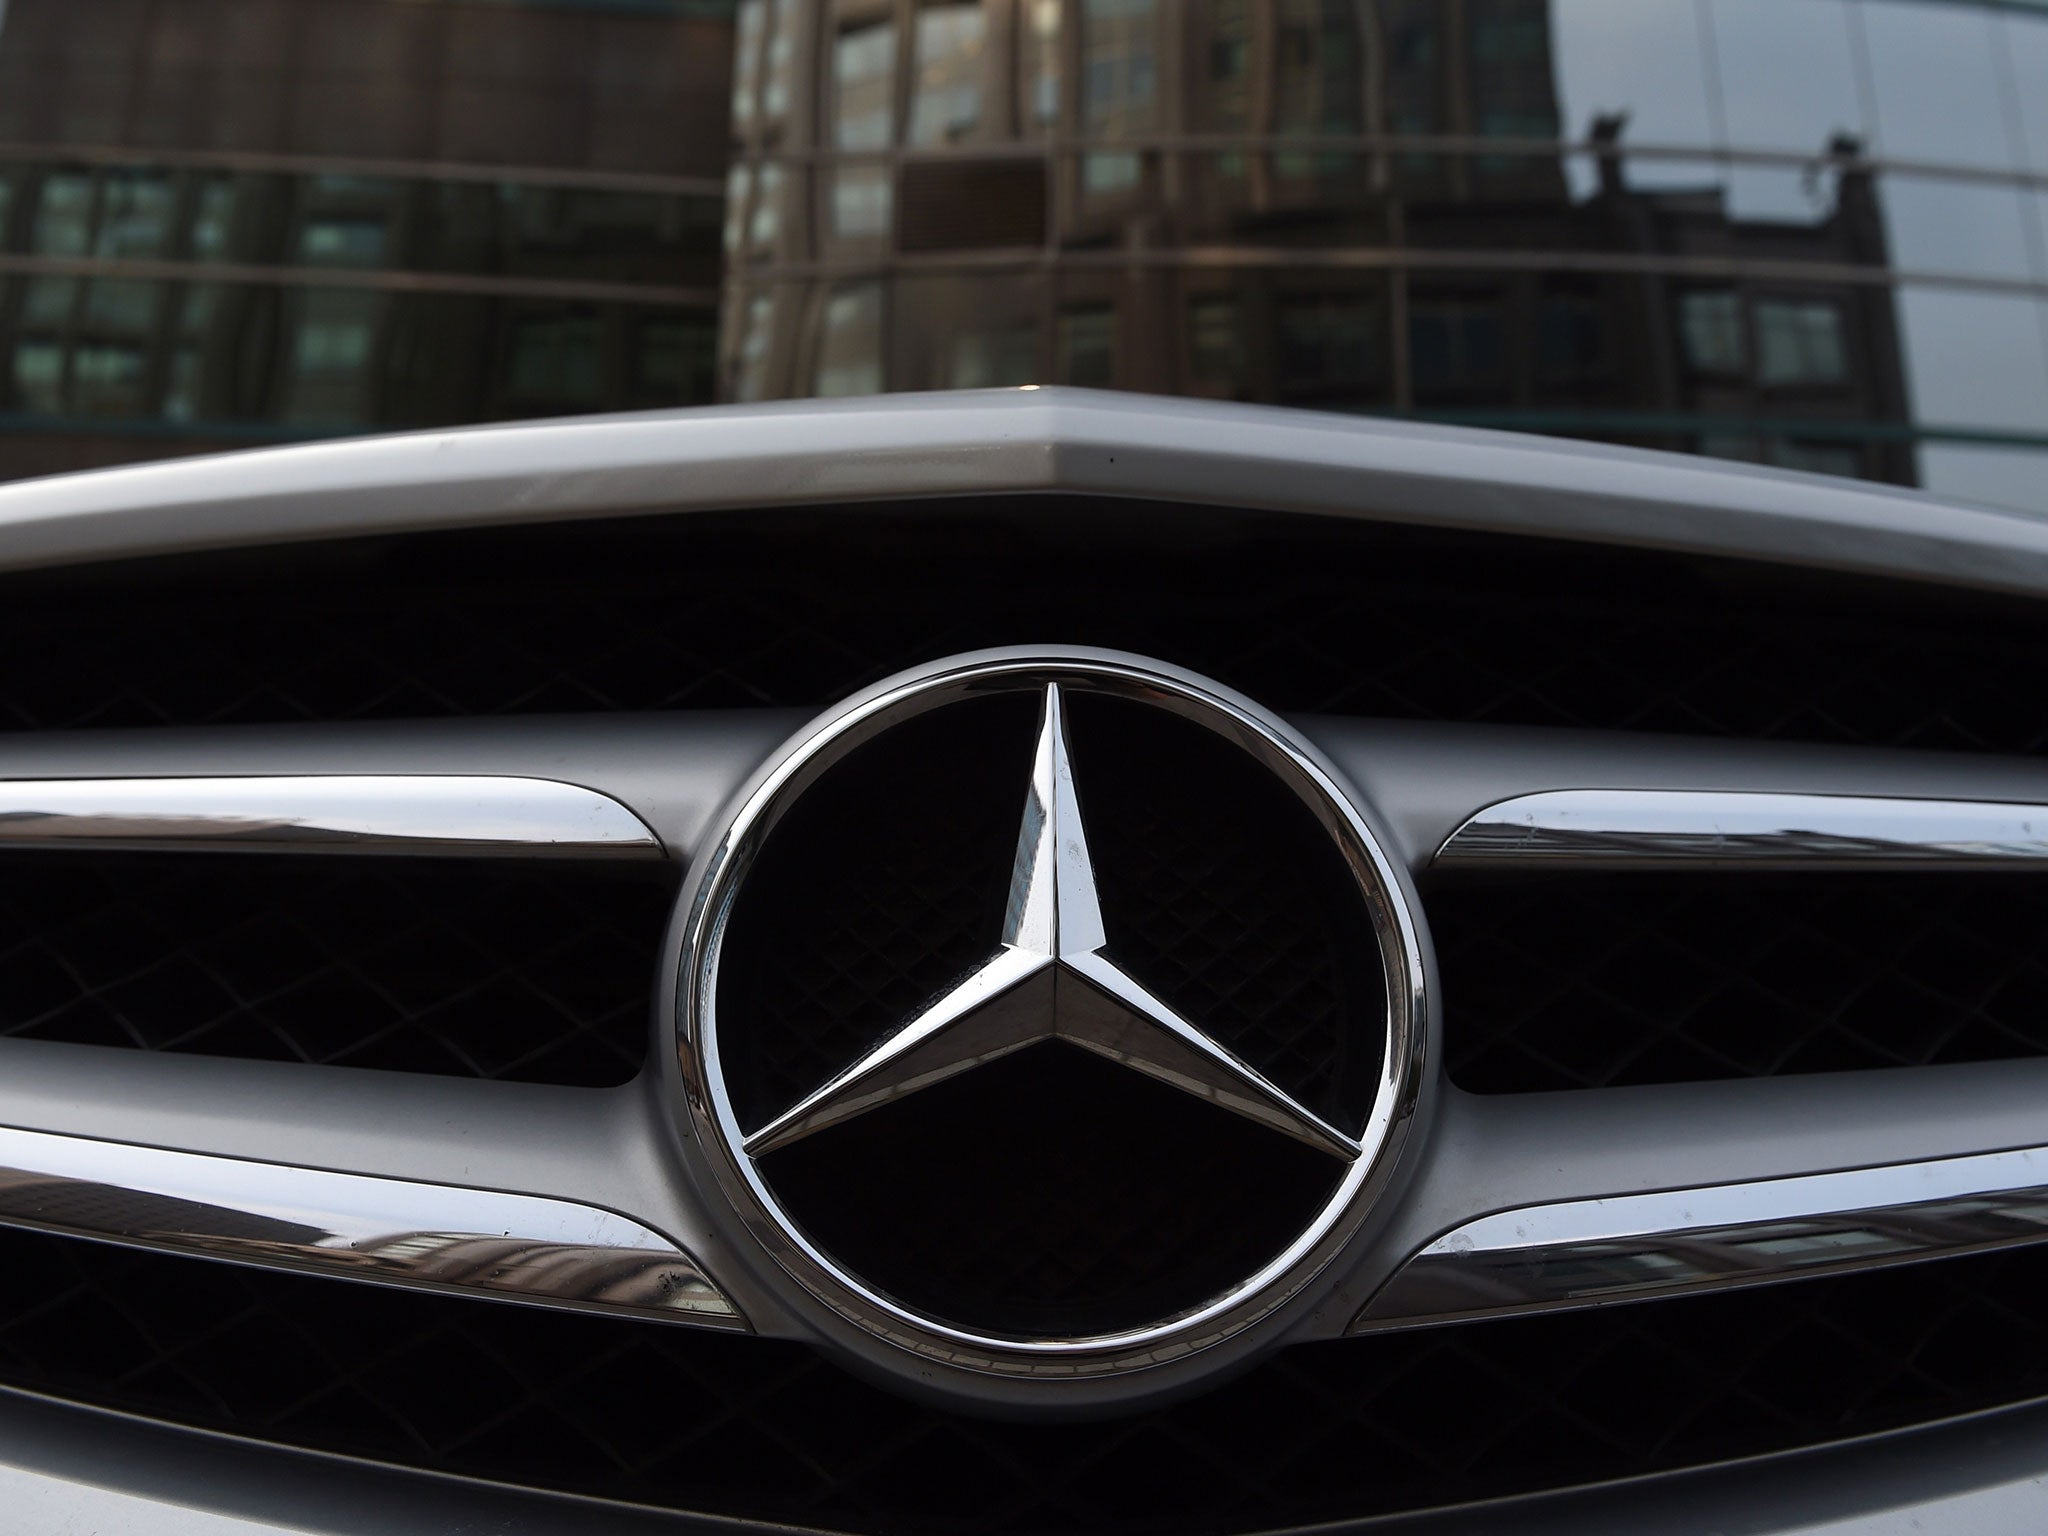 China has accused Mercedes-Benz, a unit of German car giant Daimler, of price fixing, state media reported, amid an anti-monopoly investigation into foreign car makers.